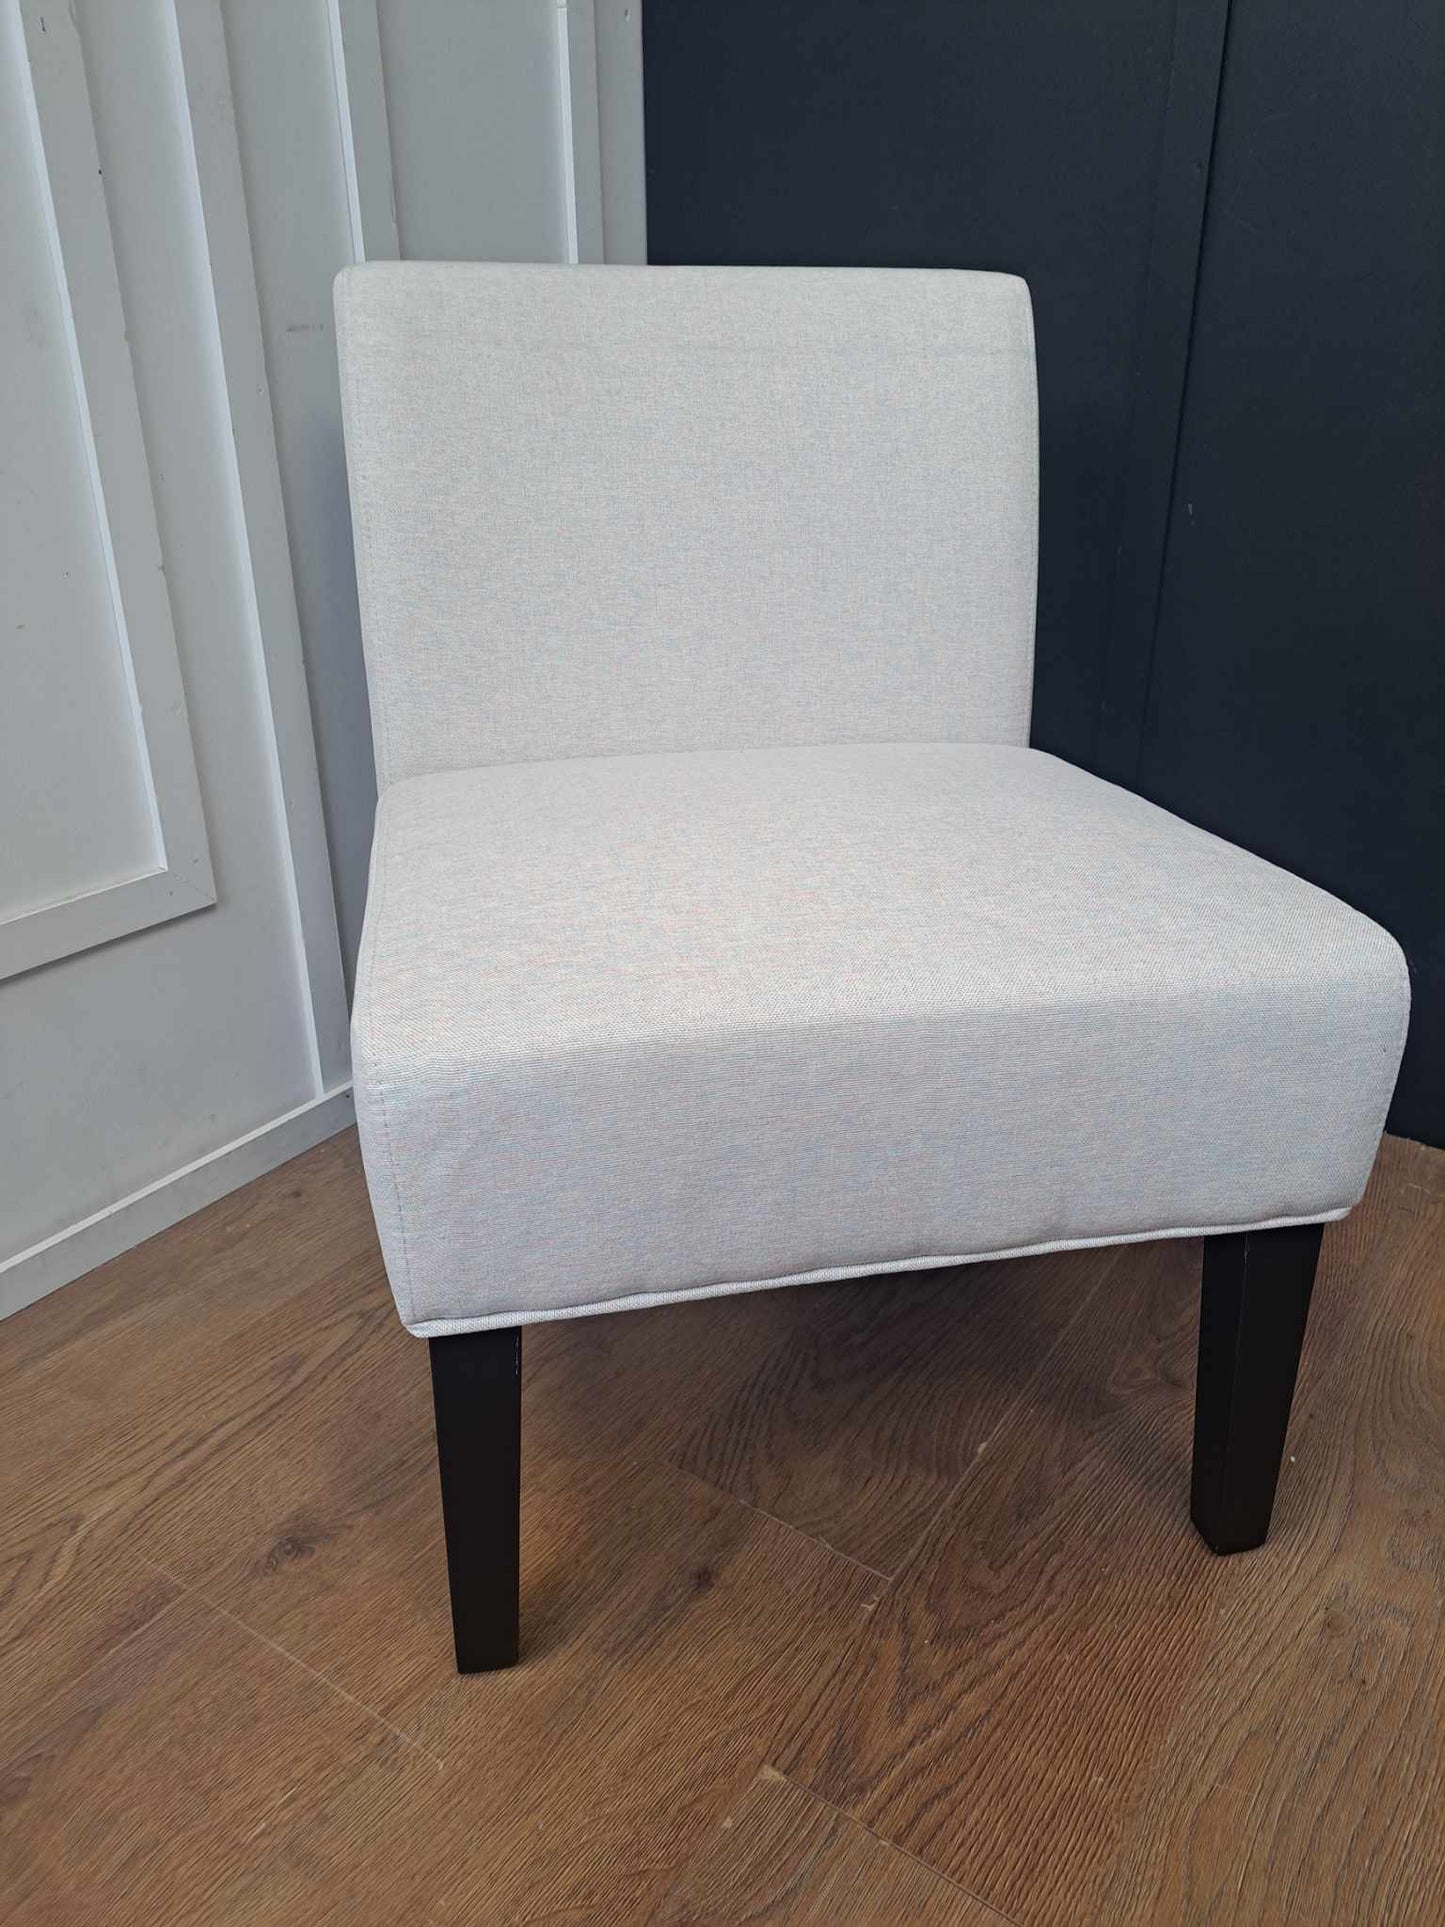 Grey and Black Accent Chair